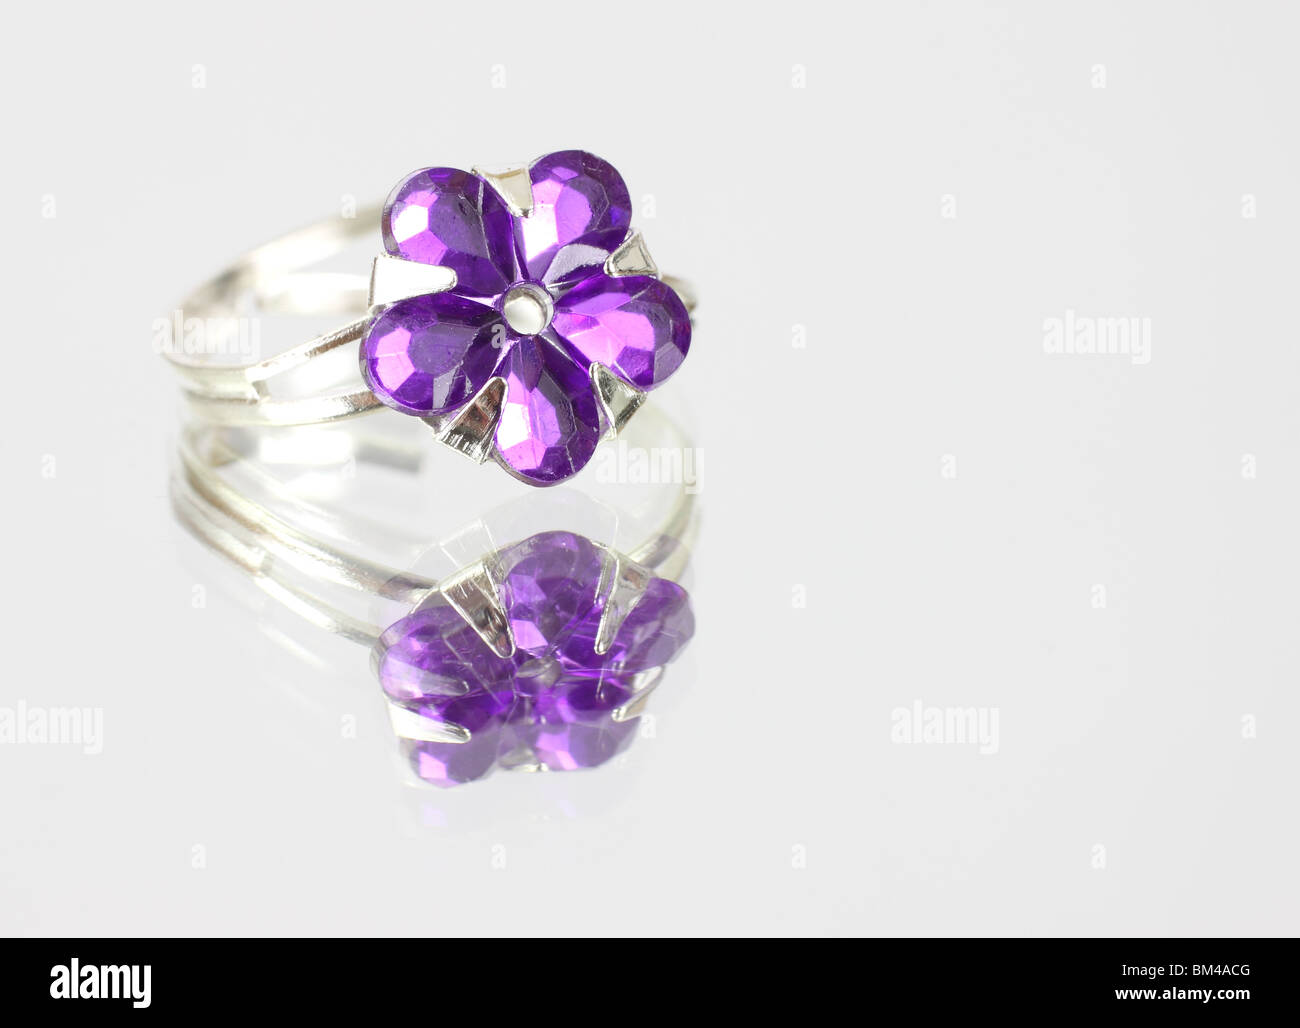 Costume jewelry ring on mirrored surface Stock Photo